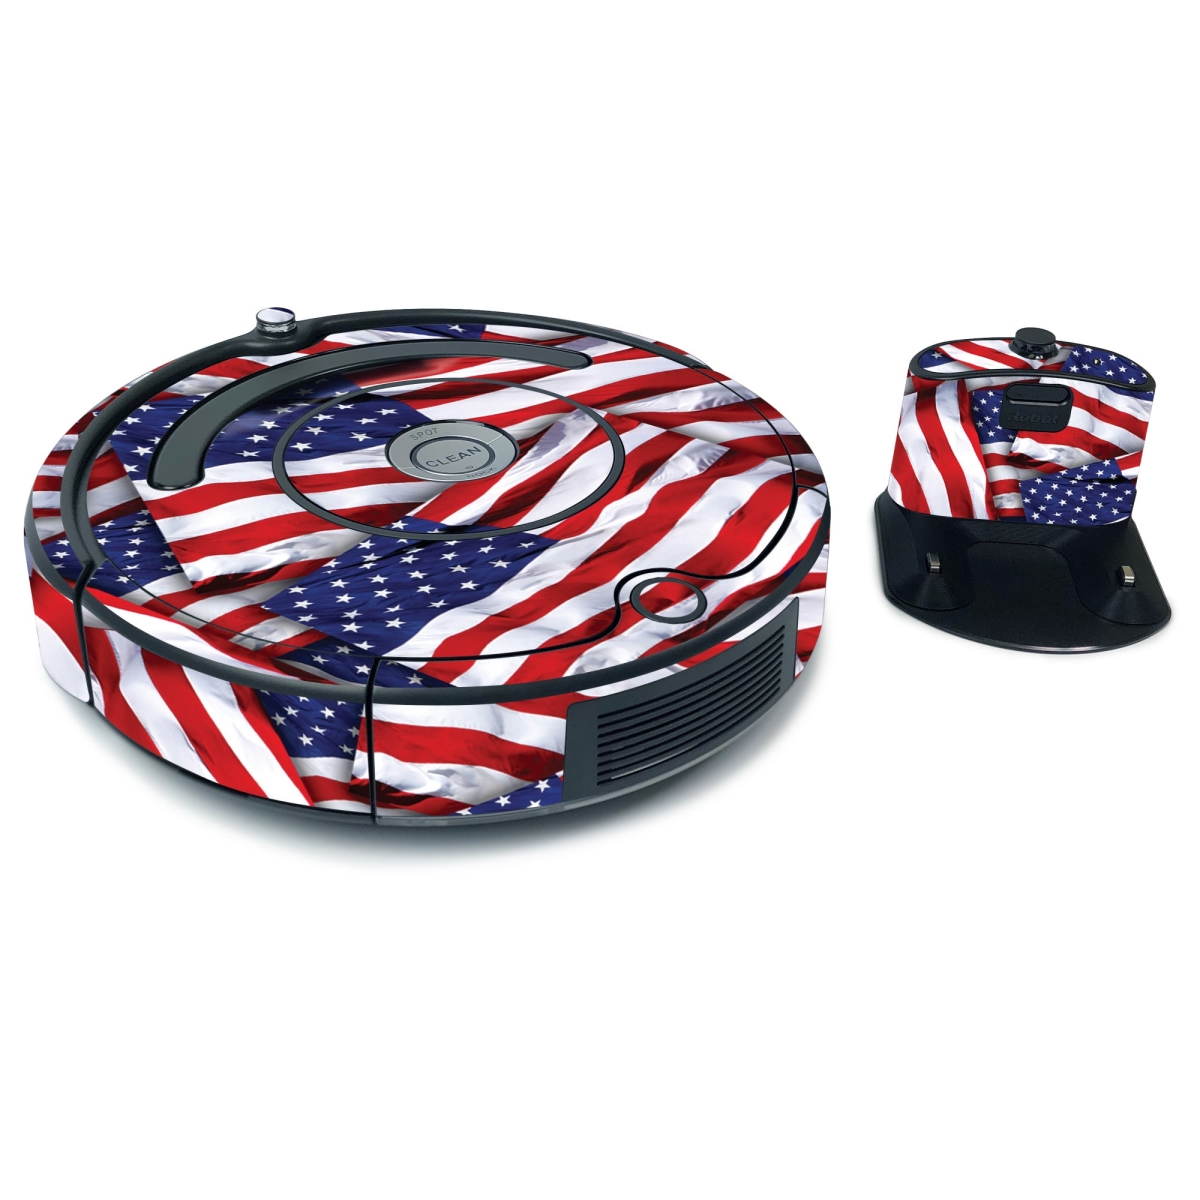 Picture of MightySkins IRRO675-Patriot Skin for iRobot Roomba 675 Max Coverage - Patriot